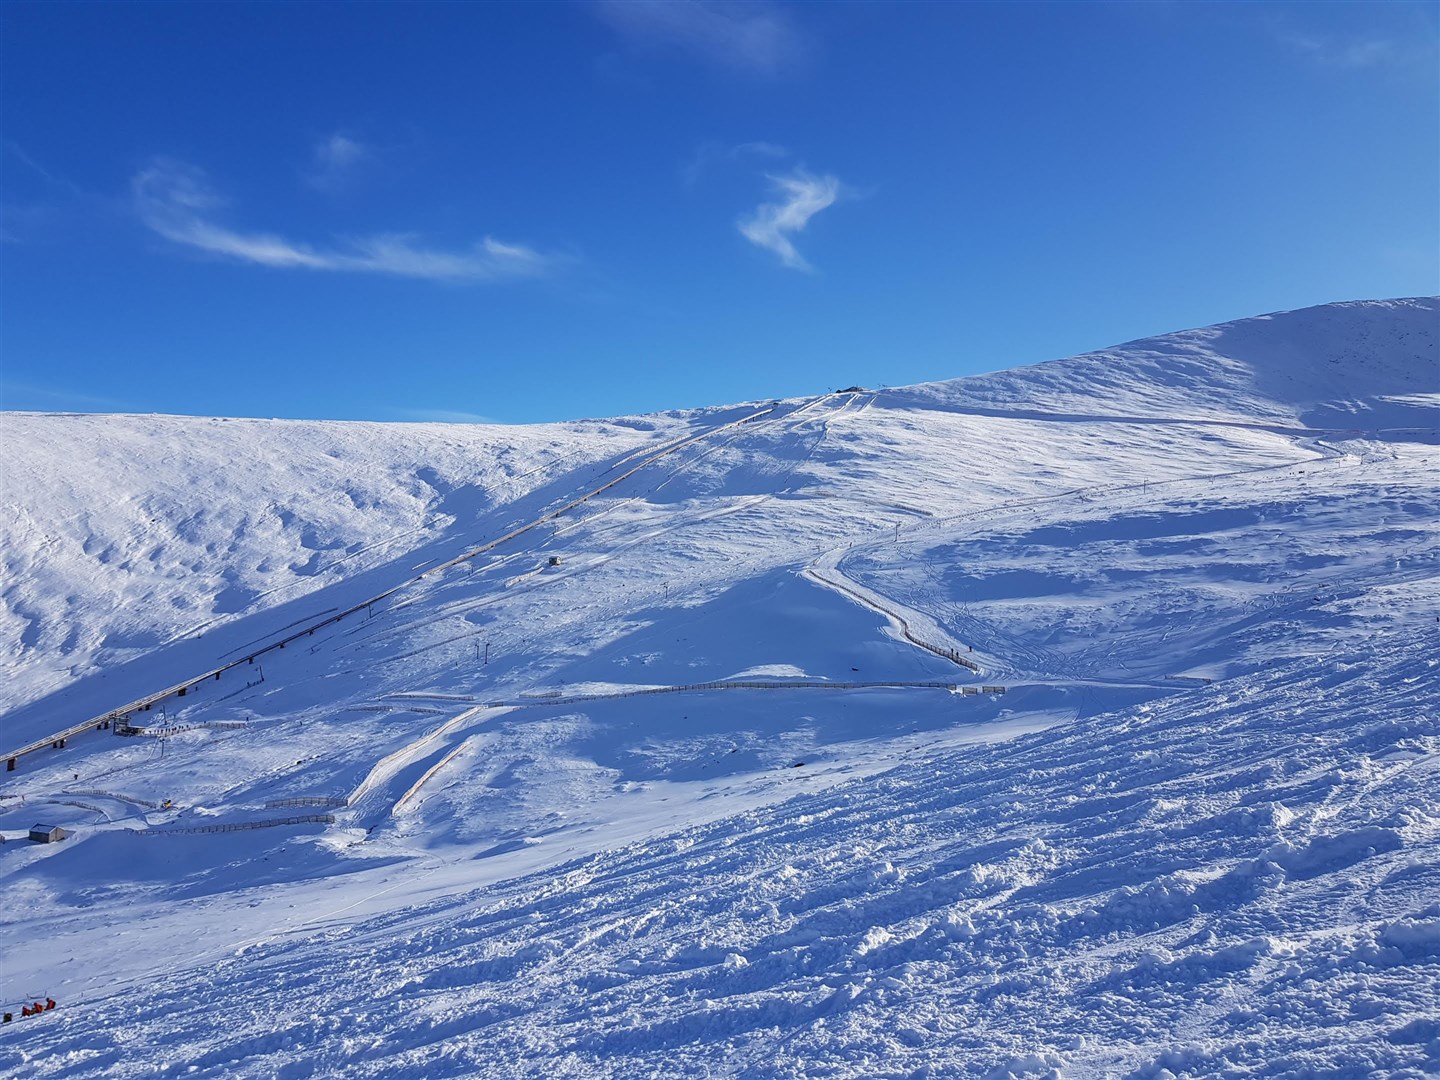 There is great snow coverage across the Cairngorm ski resort at present.